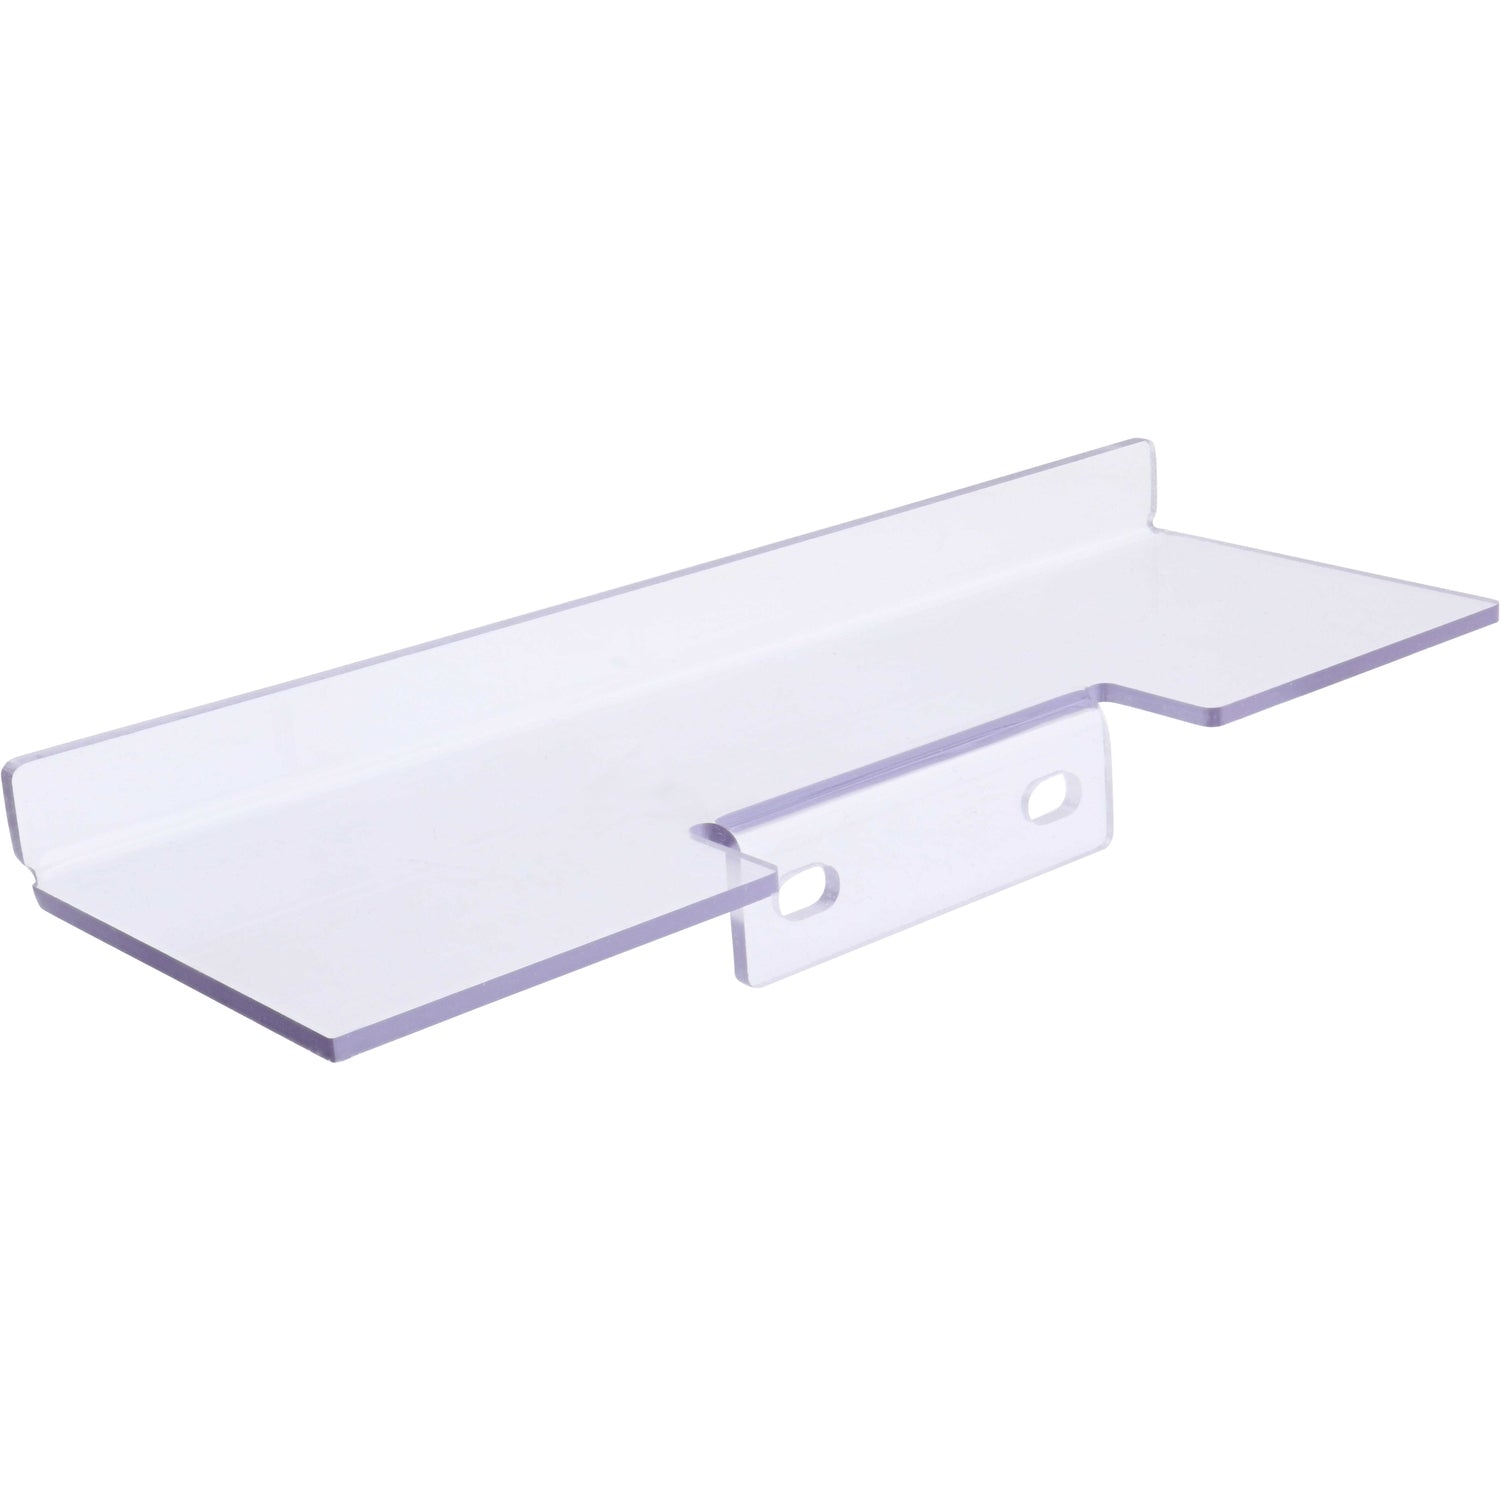 Clear bent polycarbonate guarding on a white background. S29A